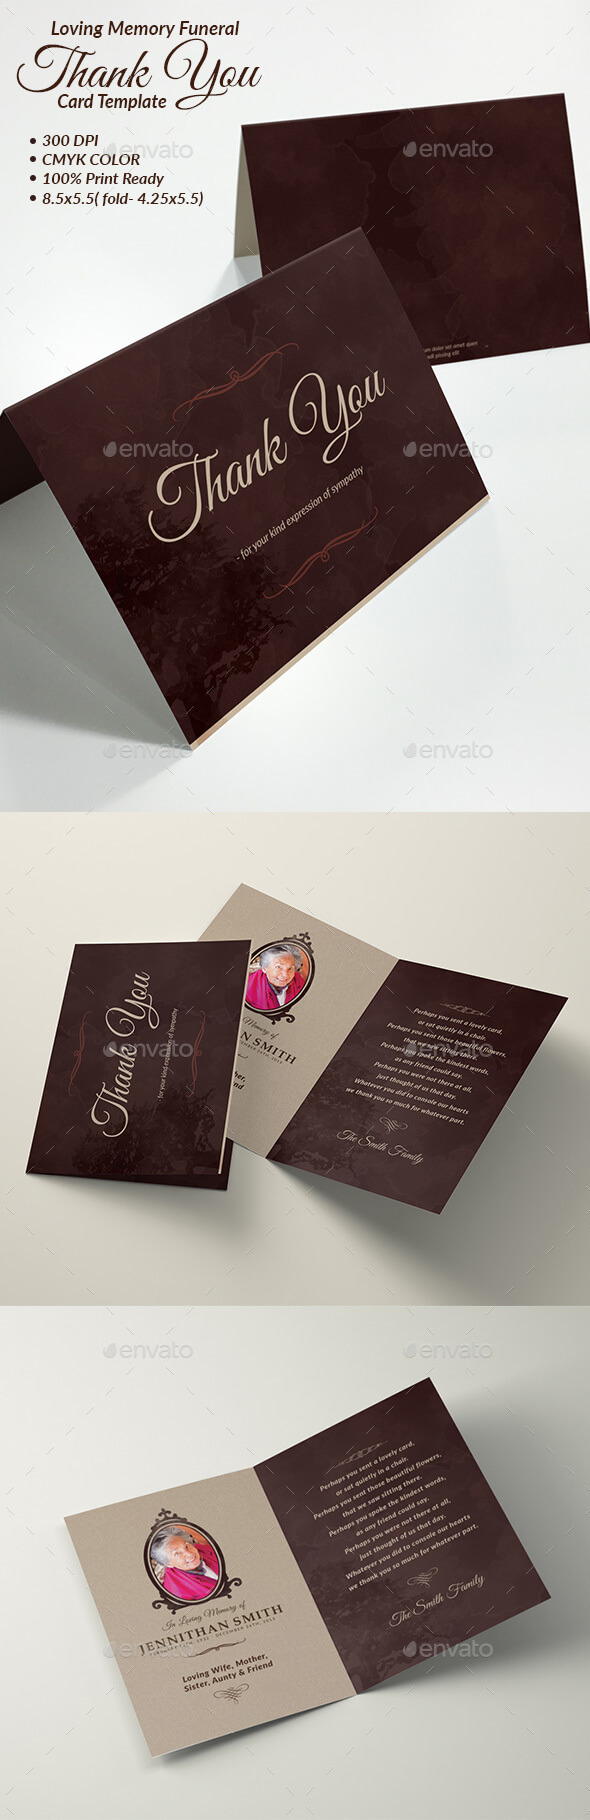 In Memory Of Graphics, Designs & Templates From Graphicriver In In Memory Cards Templates